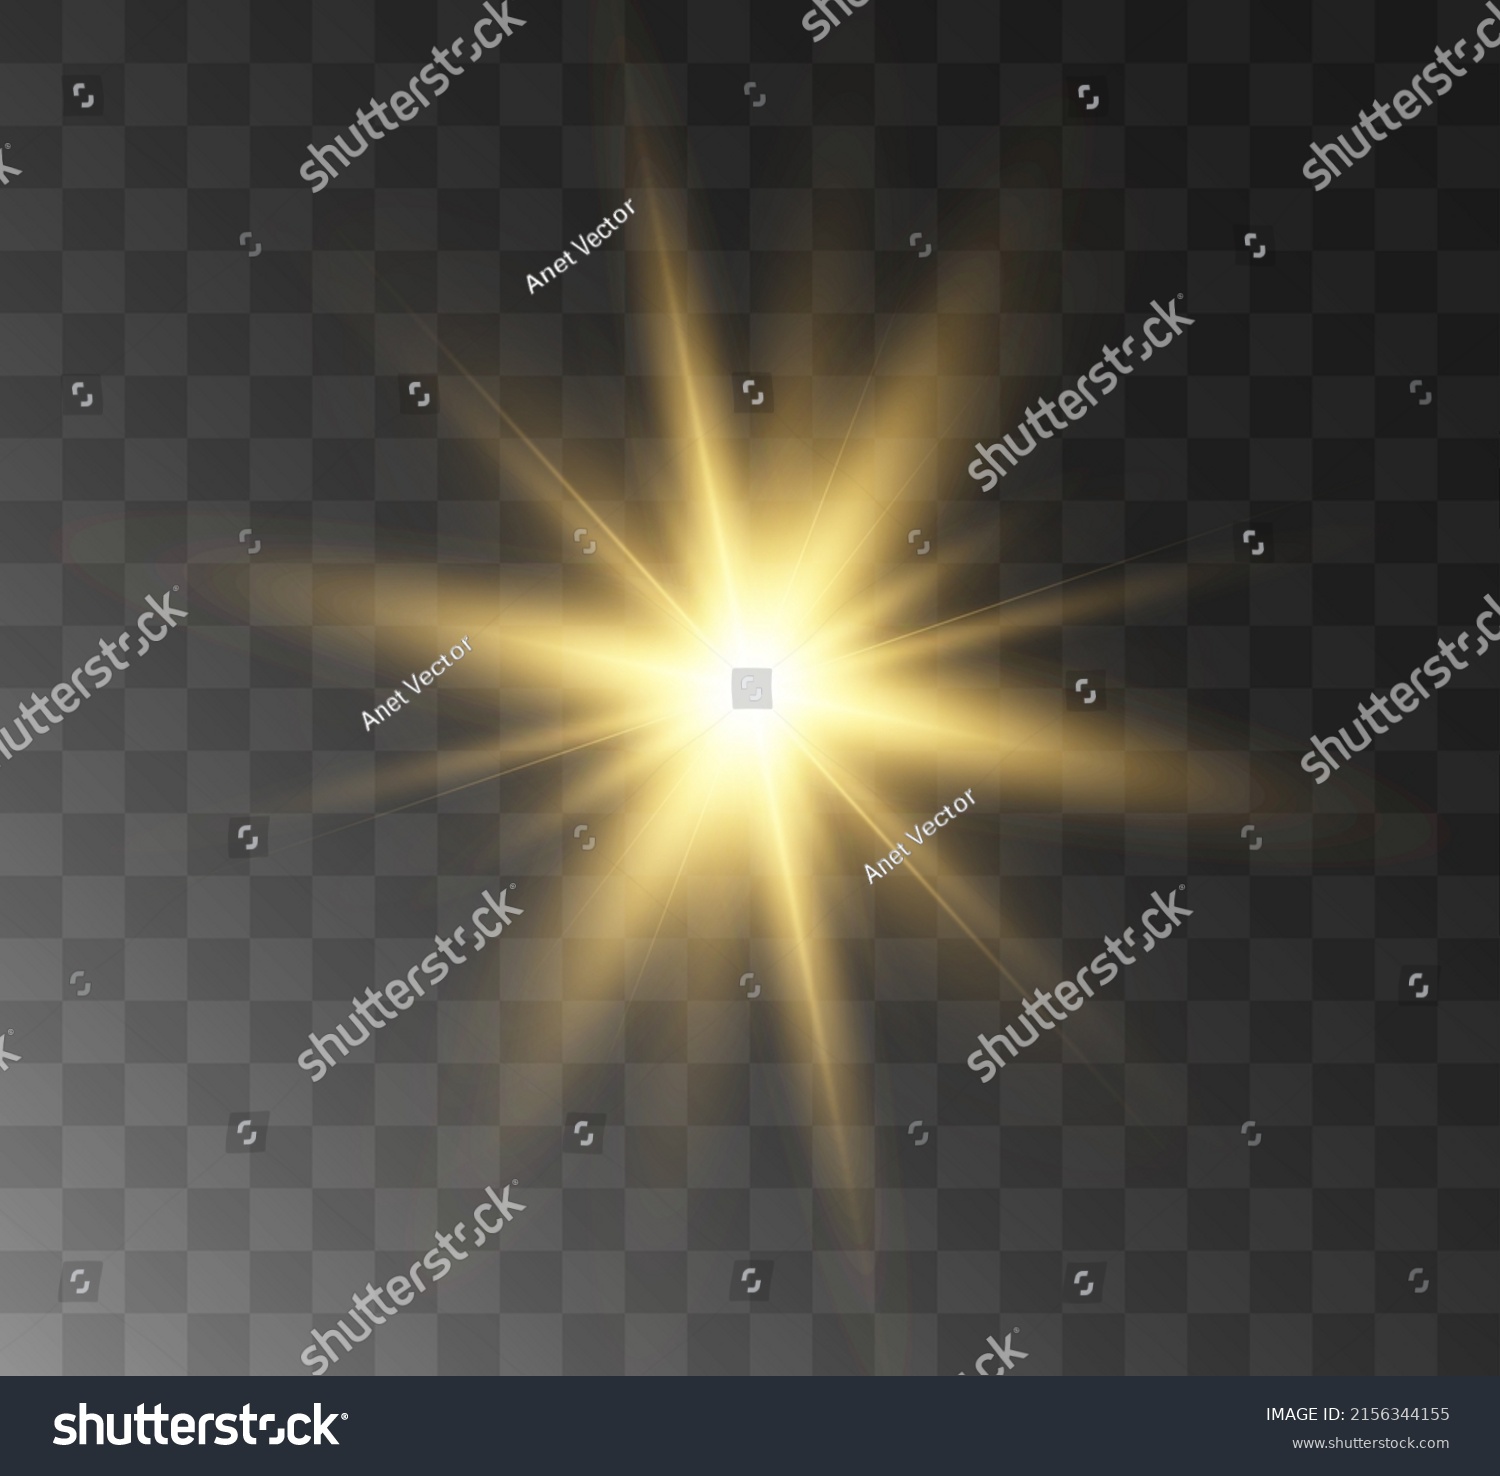 Light flare effect isolated on checkered  background. Lens flare, sparkles, bokeh, shining star with rays concept. Abstract luminous explosion #2156344155